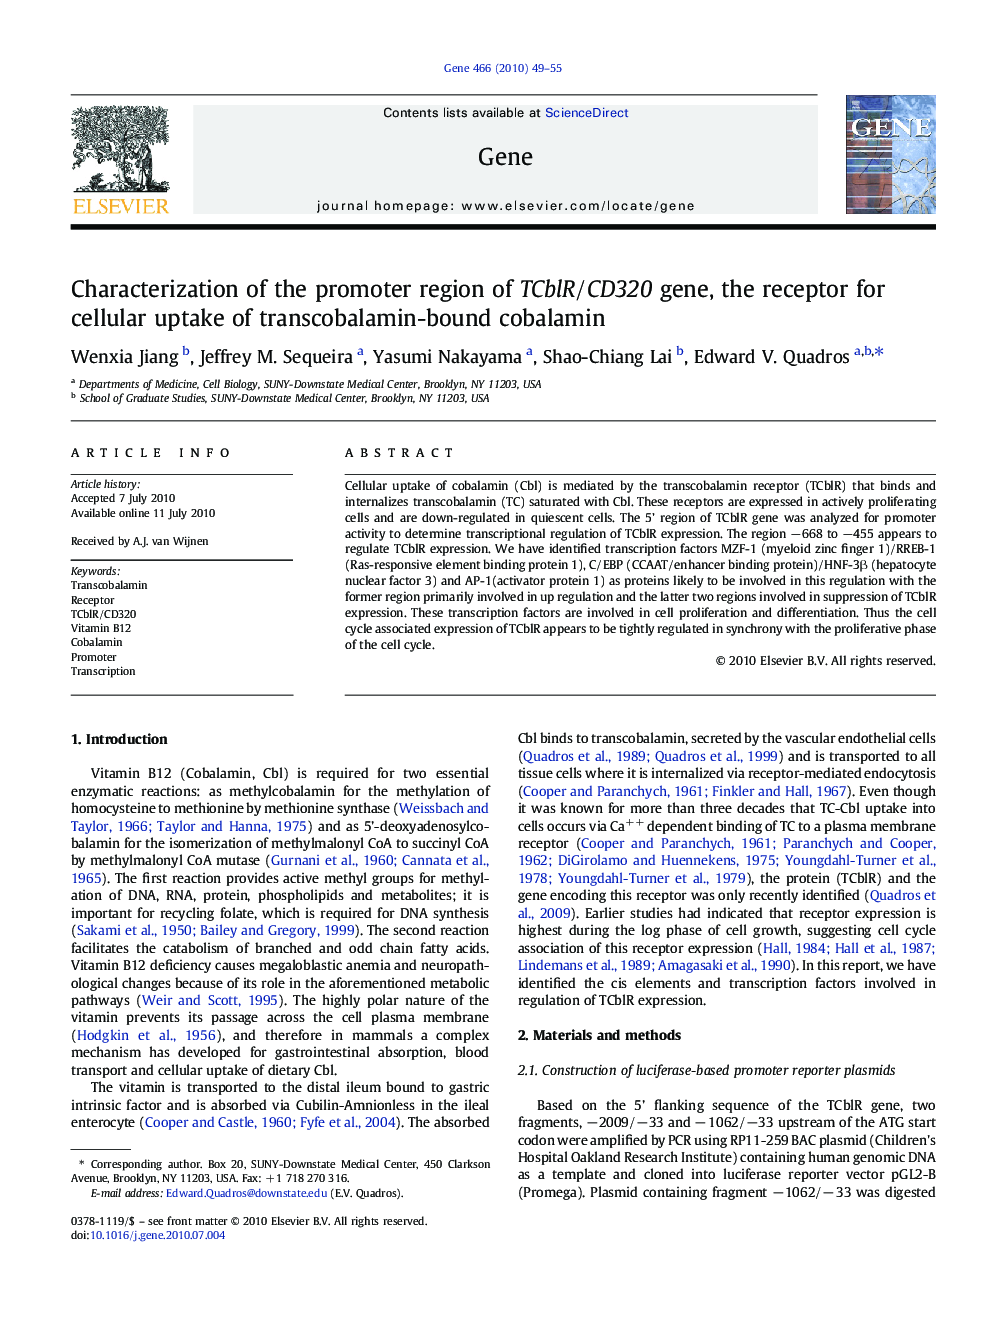 Characterization of the promoter region of TCblR/CD320 gene, the receptor for cellular uptake of transcobalamin-bound cobalamin